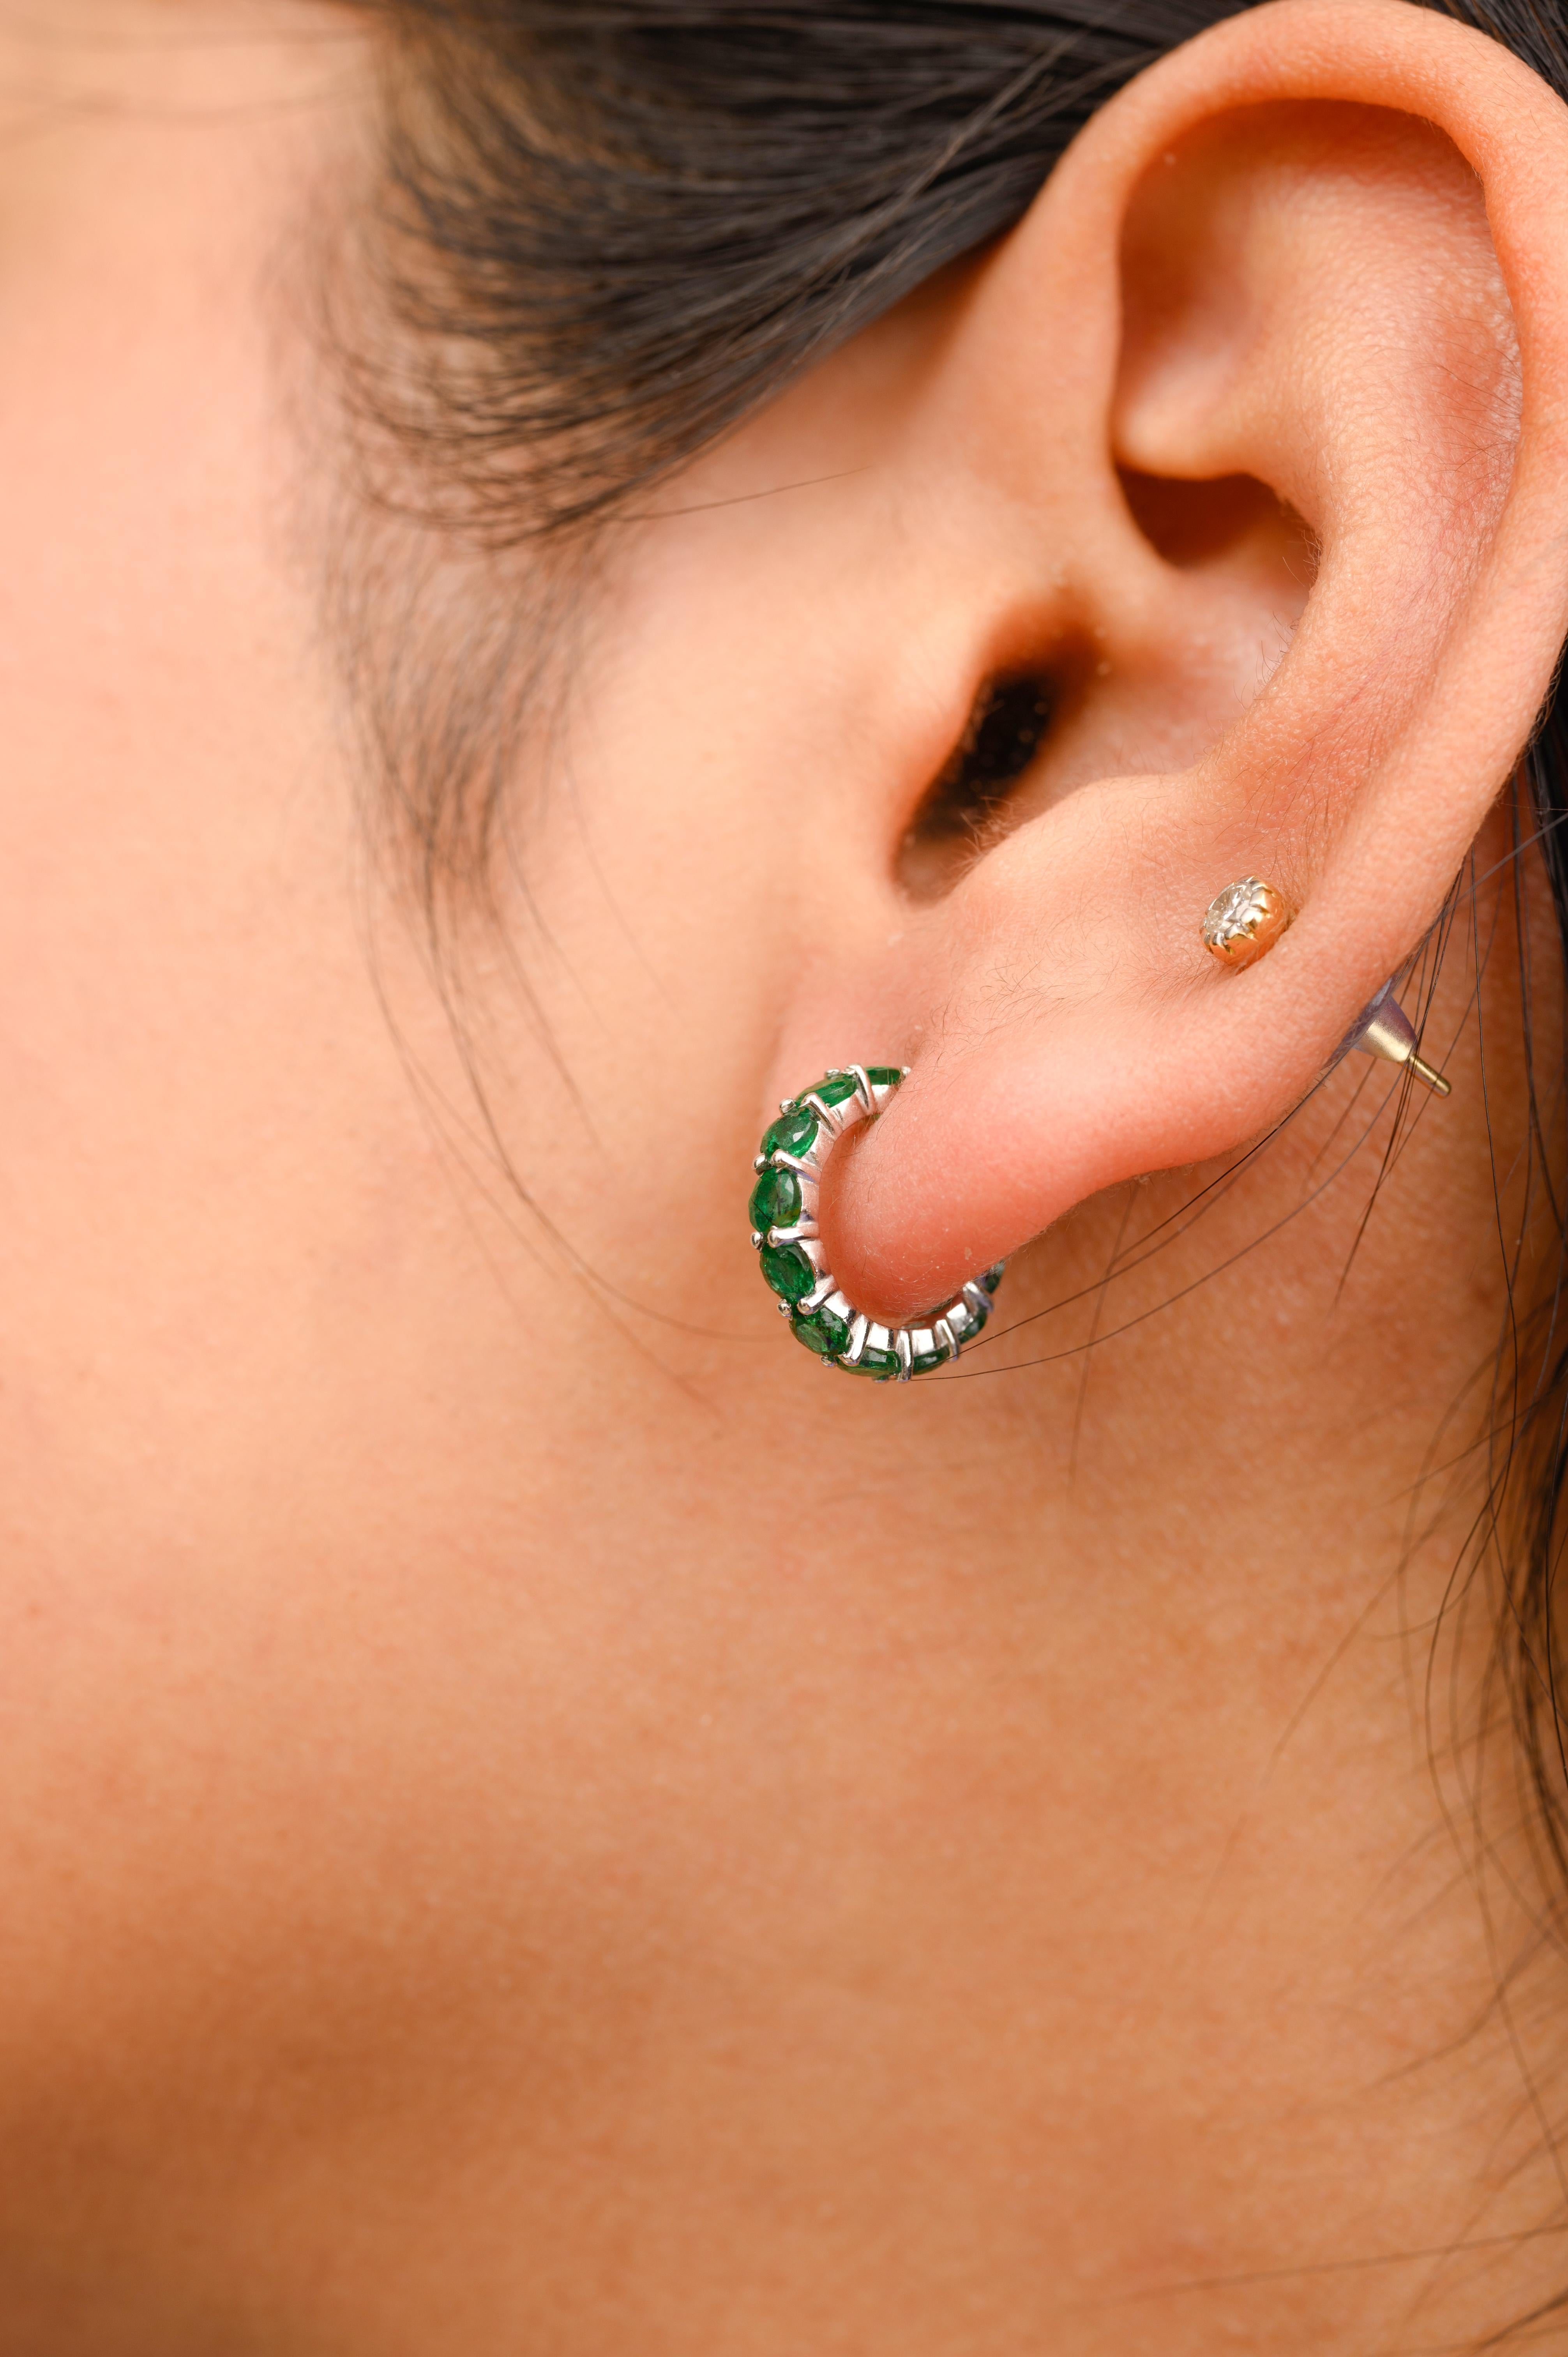 Round Cut 18k White Gold Bright Emerald Birthstone Tiny Hoop Earrings Gift for Her